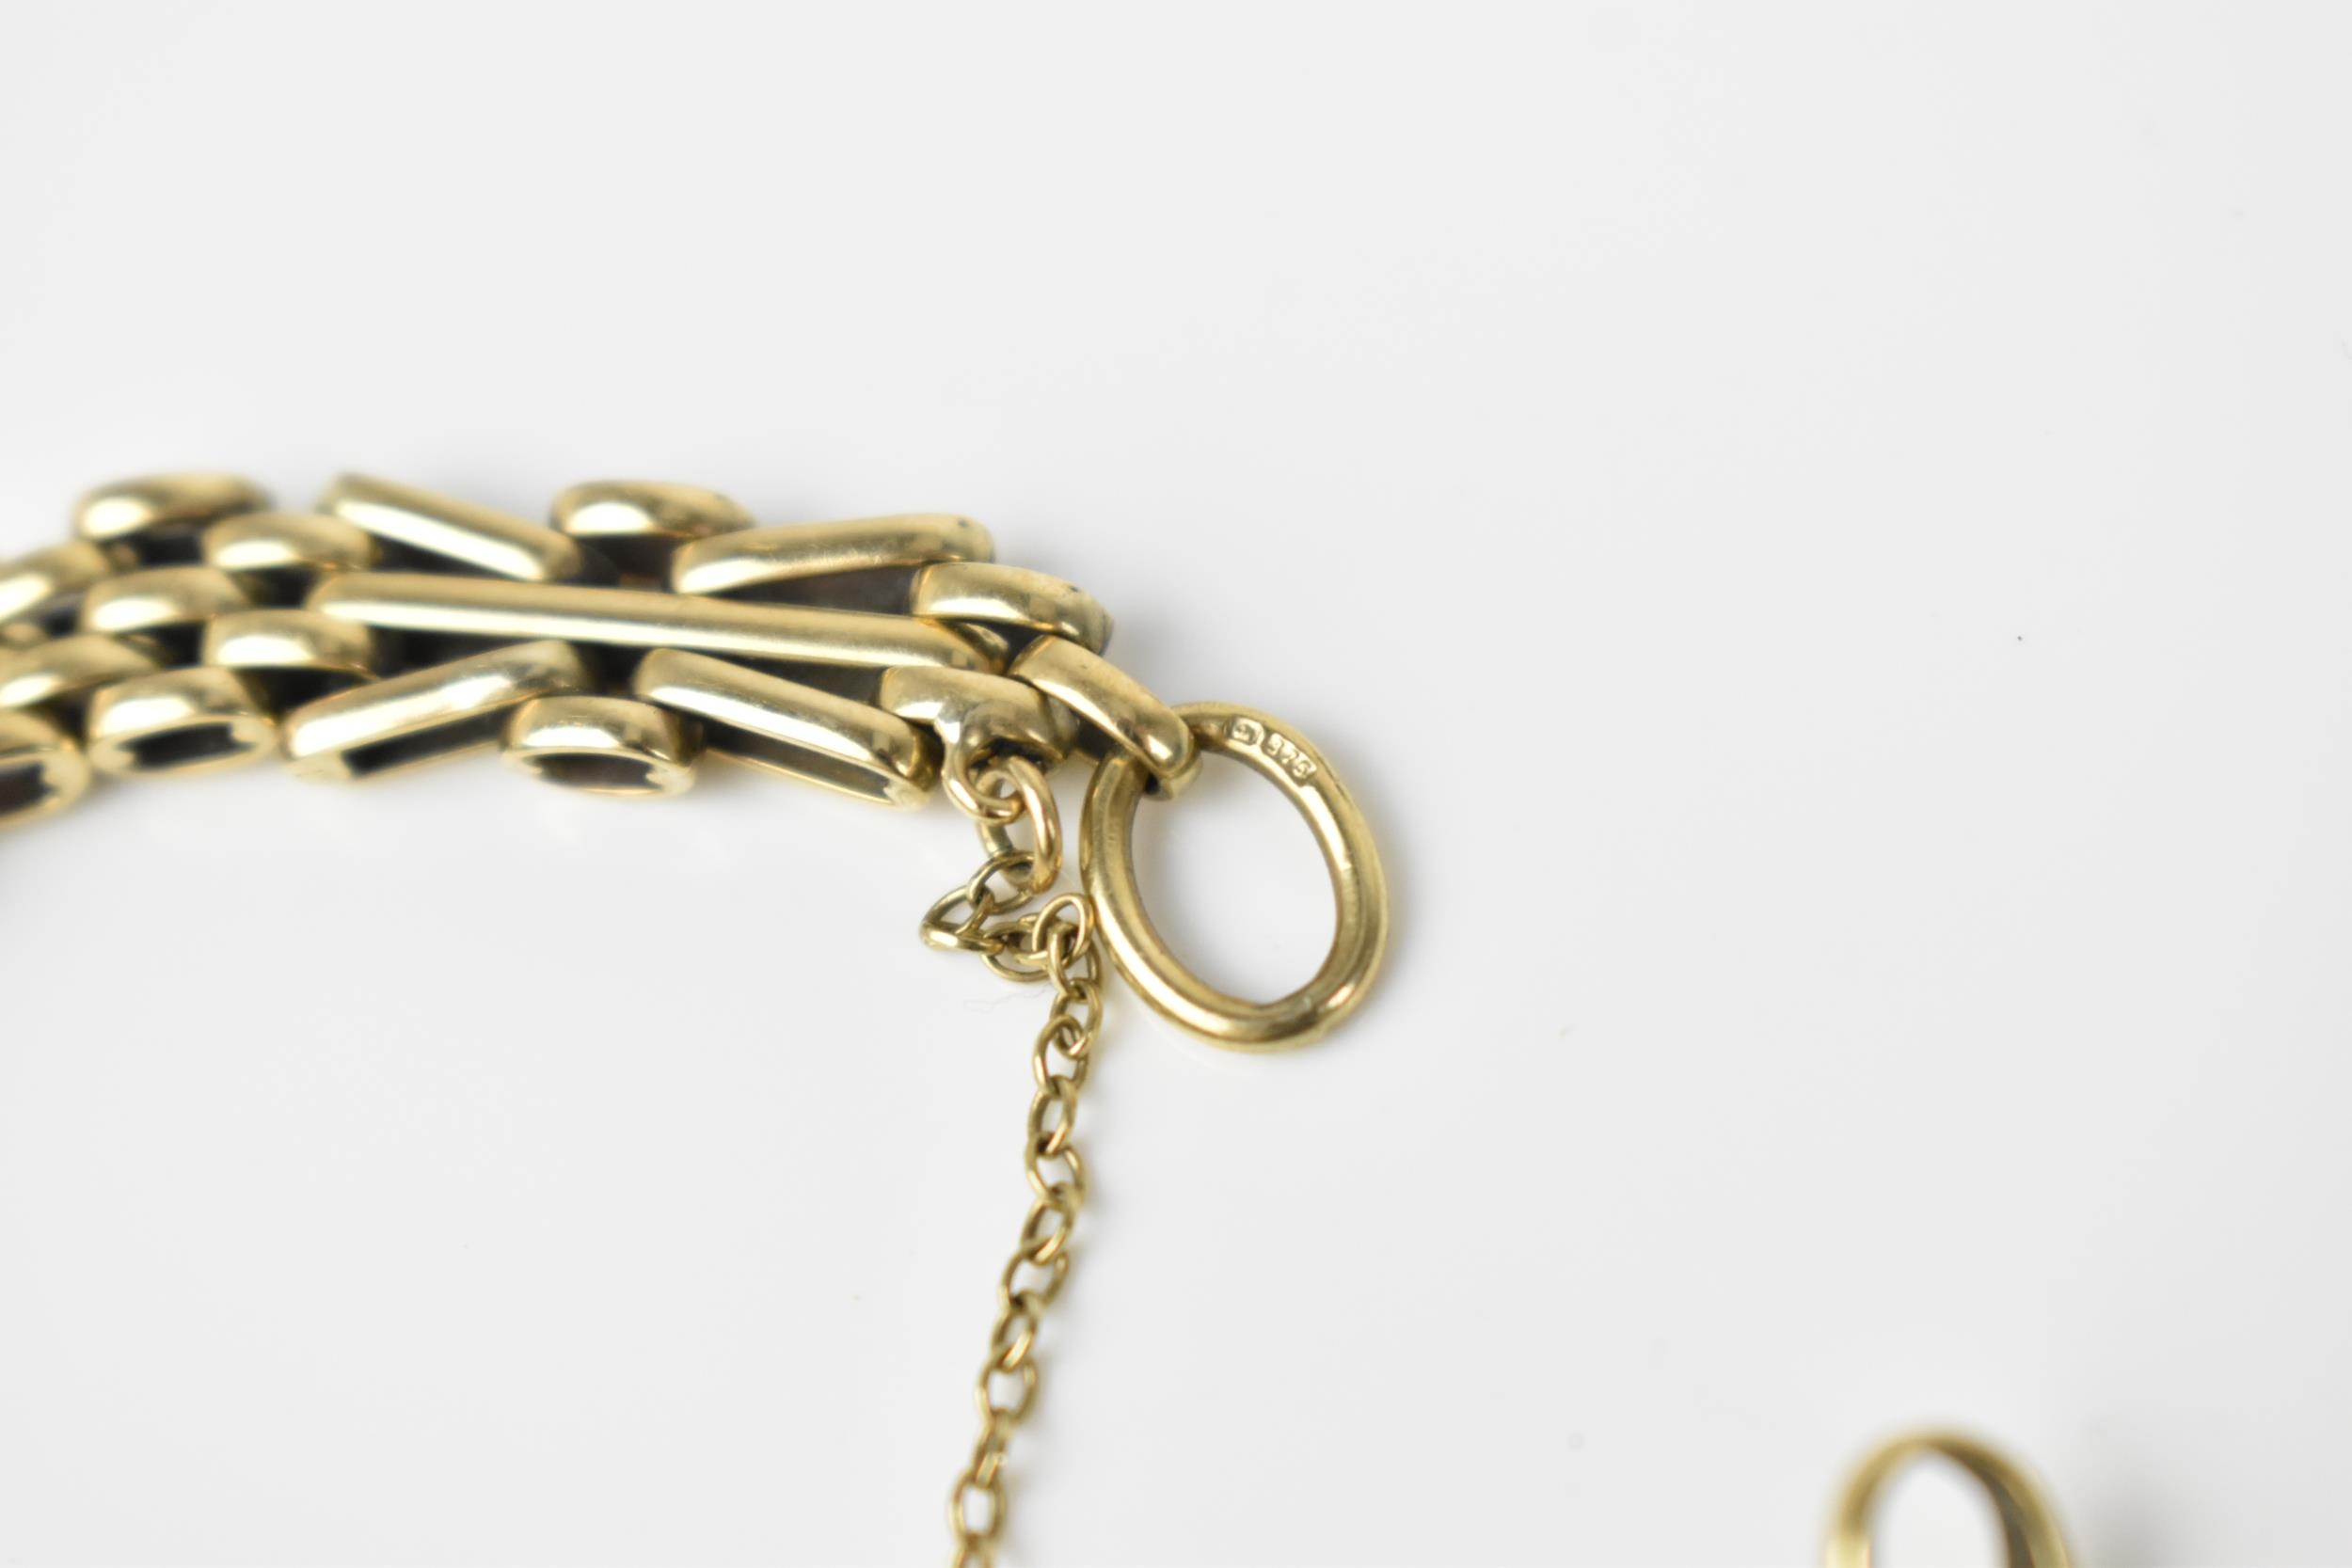 A 9ct yellow gold brick link bracelet, with lobster clasp and safety chain, stamped 9k, weight 13 - Image 2 of 2